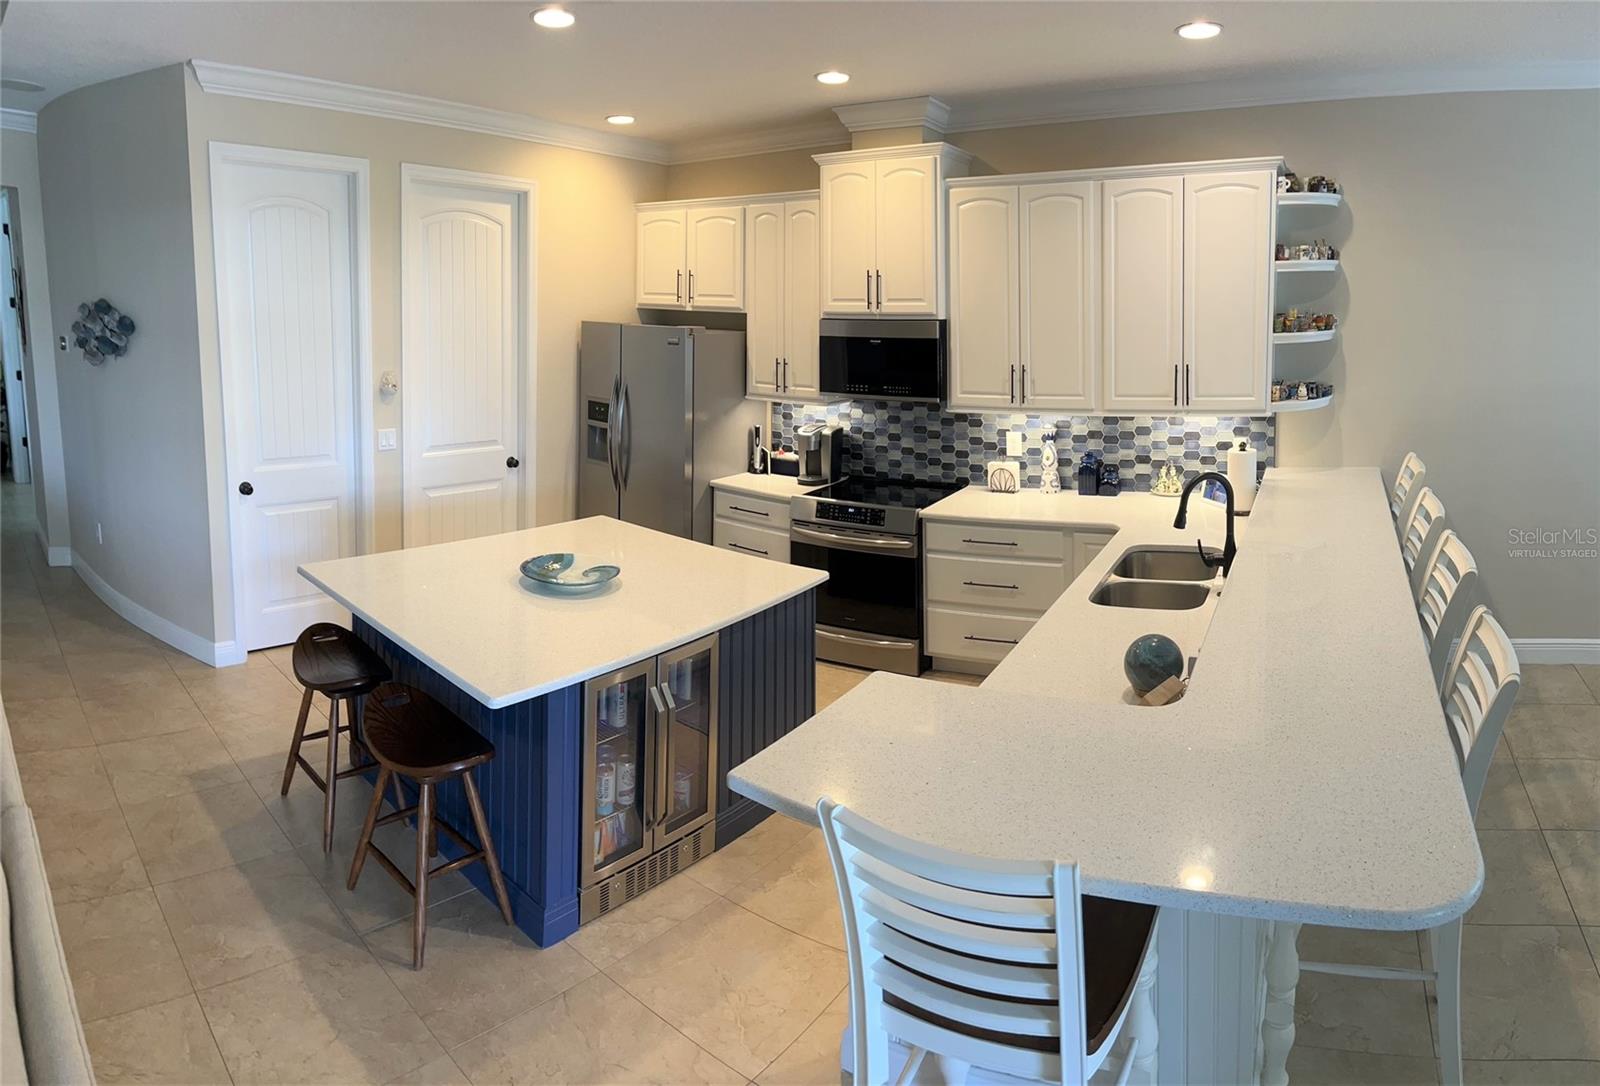 Kitchen - large island with 2 bev refrig-Virtually staged